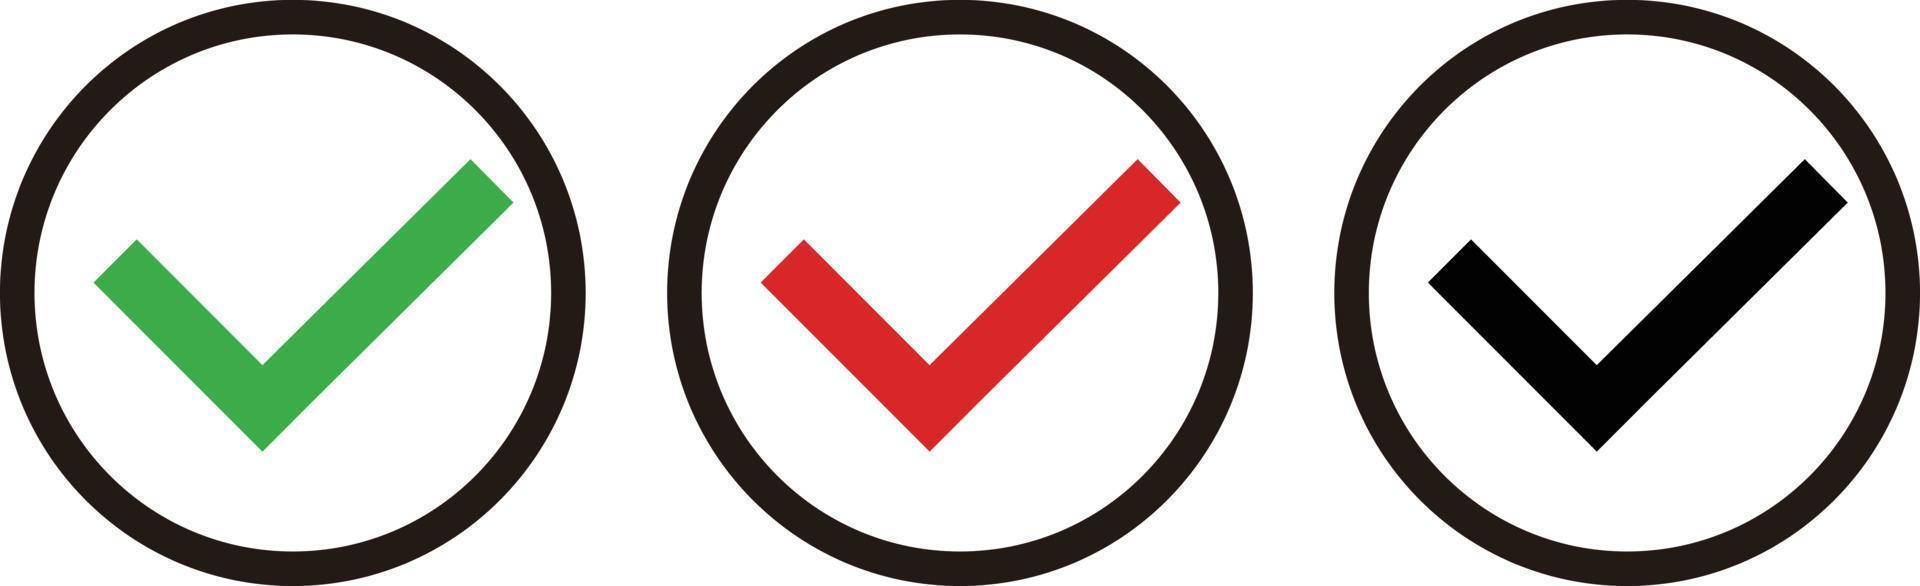 Green, red, and black check mark icon. Simple vector illustration of a round shape.